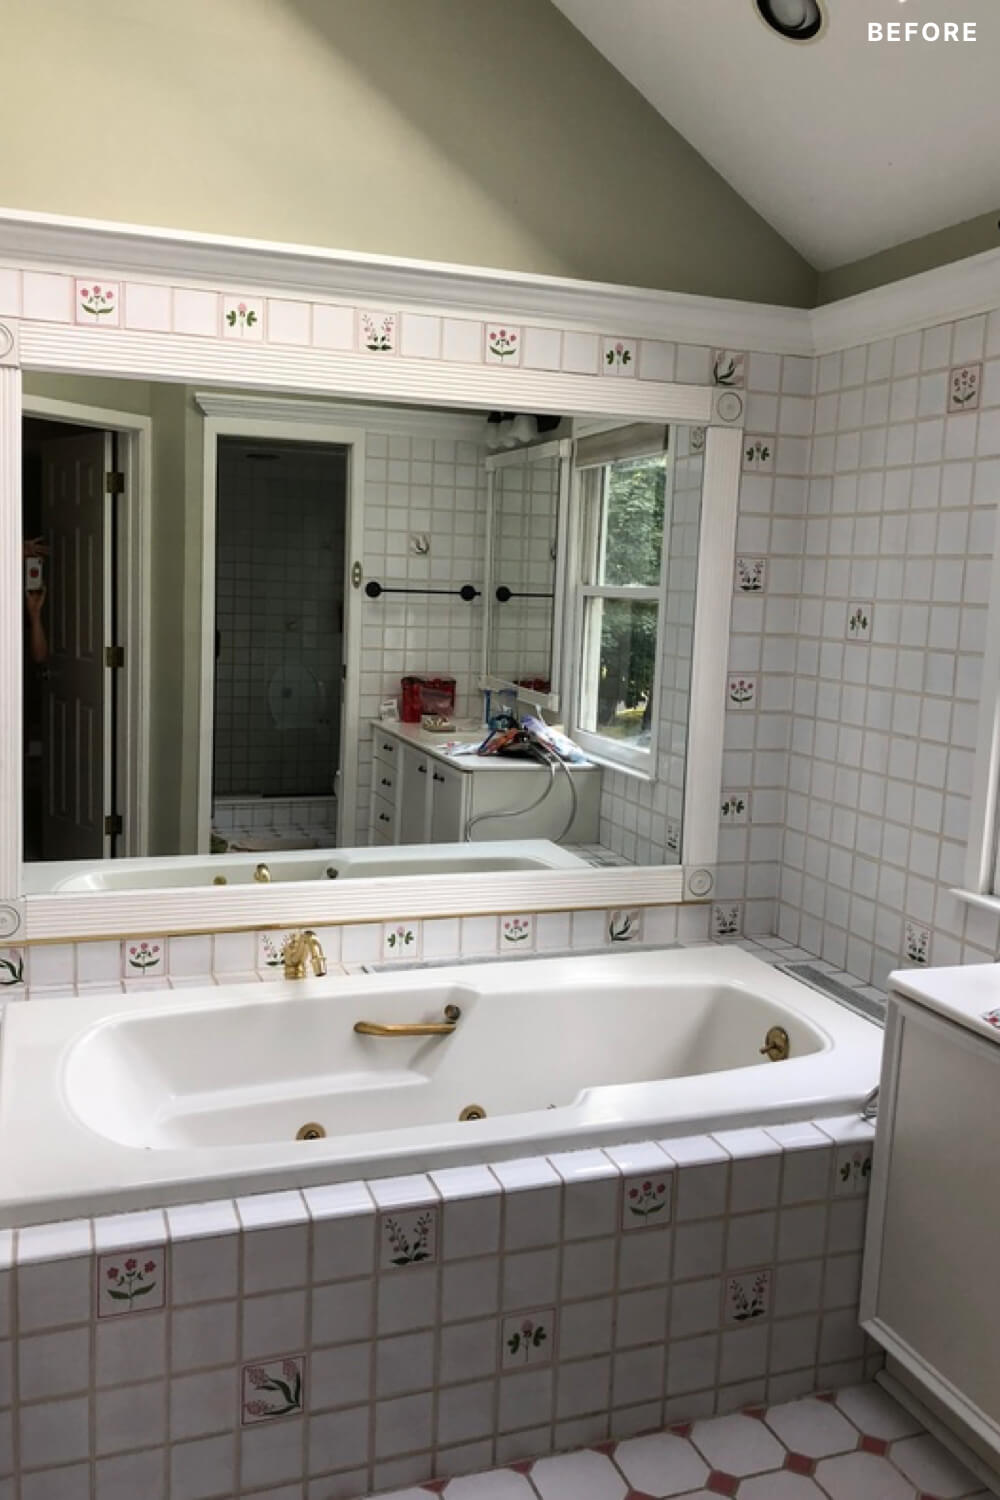 Patterned tiled white bathroom with white bathtub and large mirror before renovation